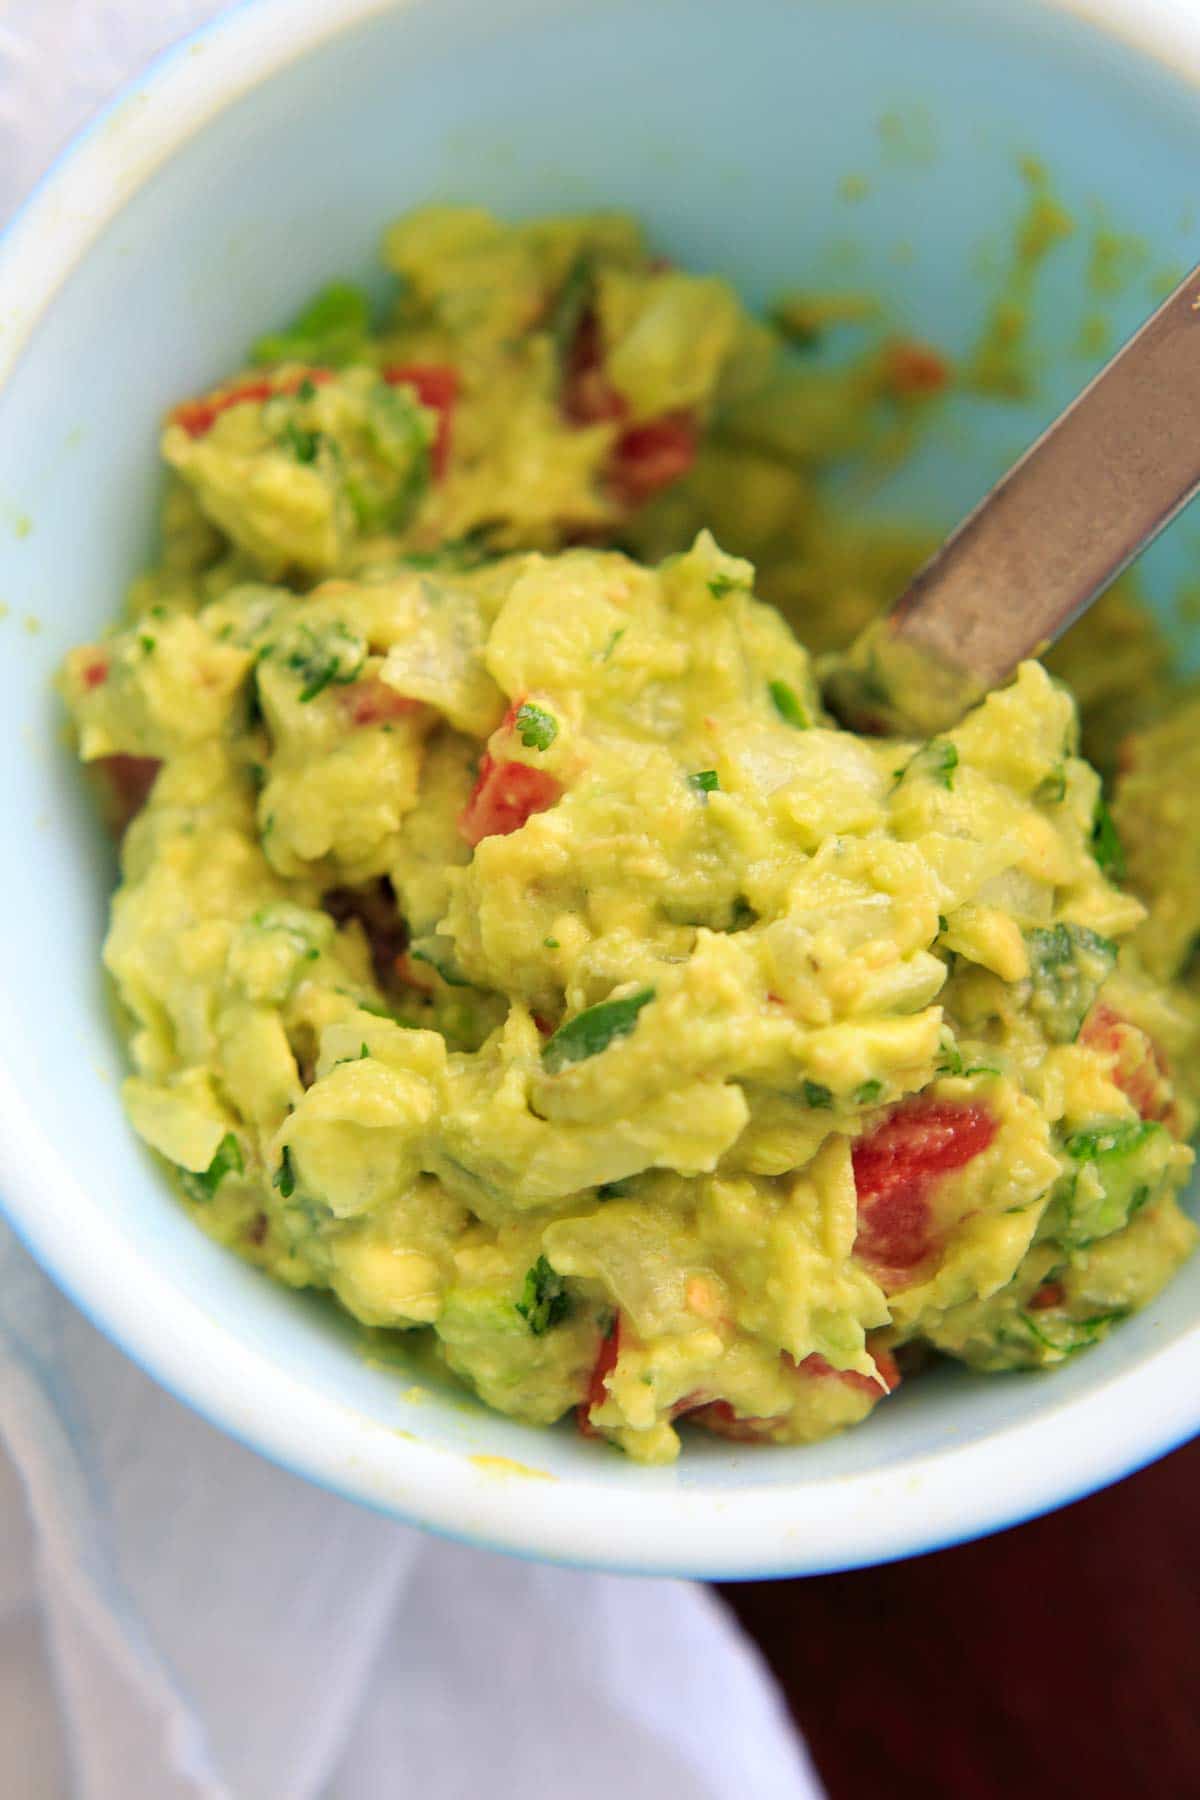 mashing up the best ever guacamole with a spoon in bowl